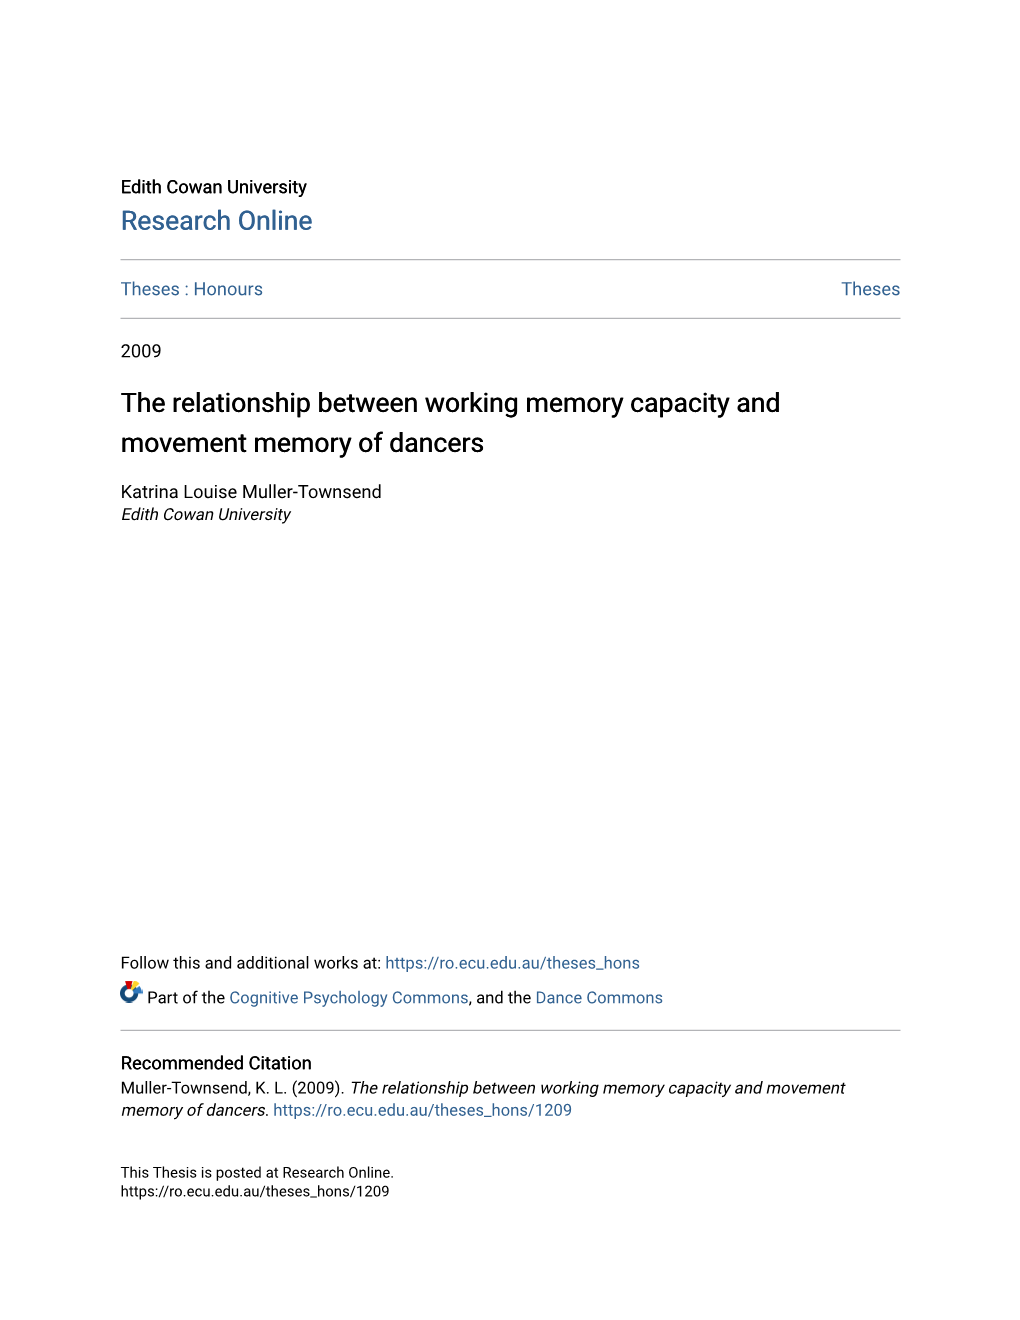 The Relationship Between Working Memory Capacity and Movement Memory of Dancers